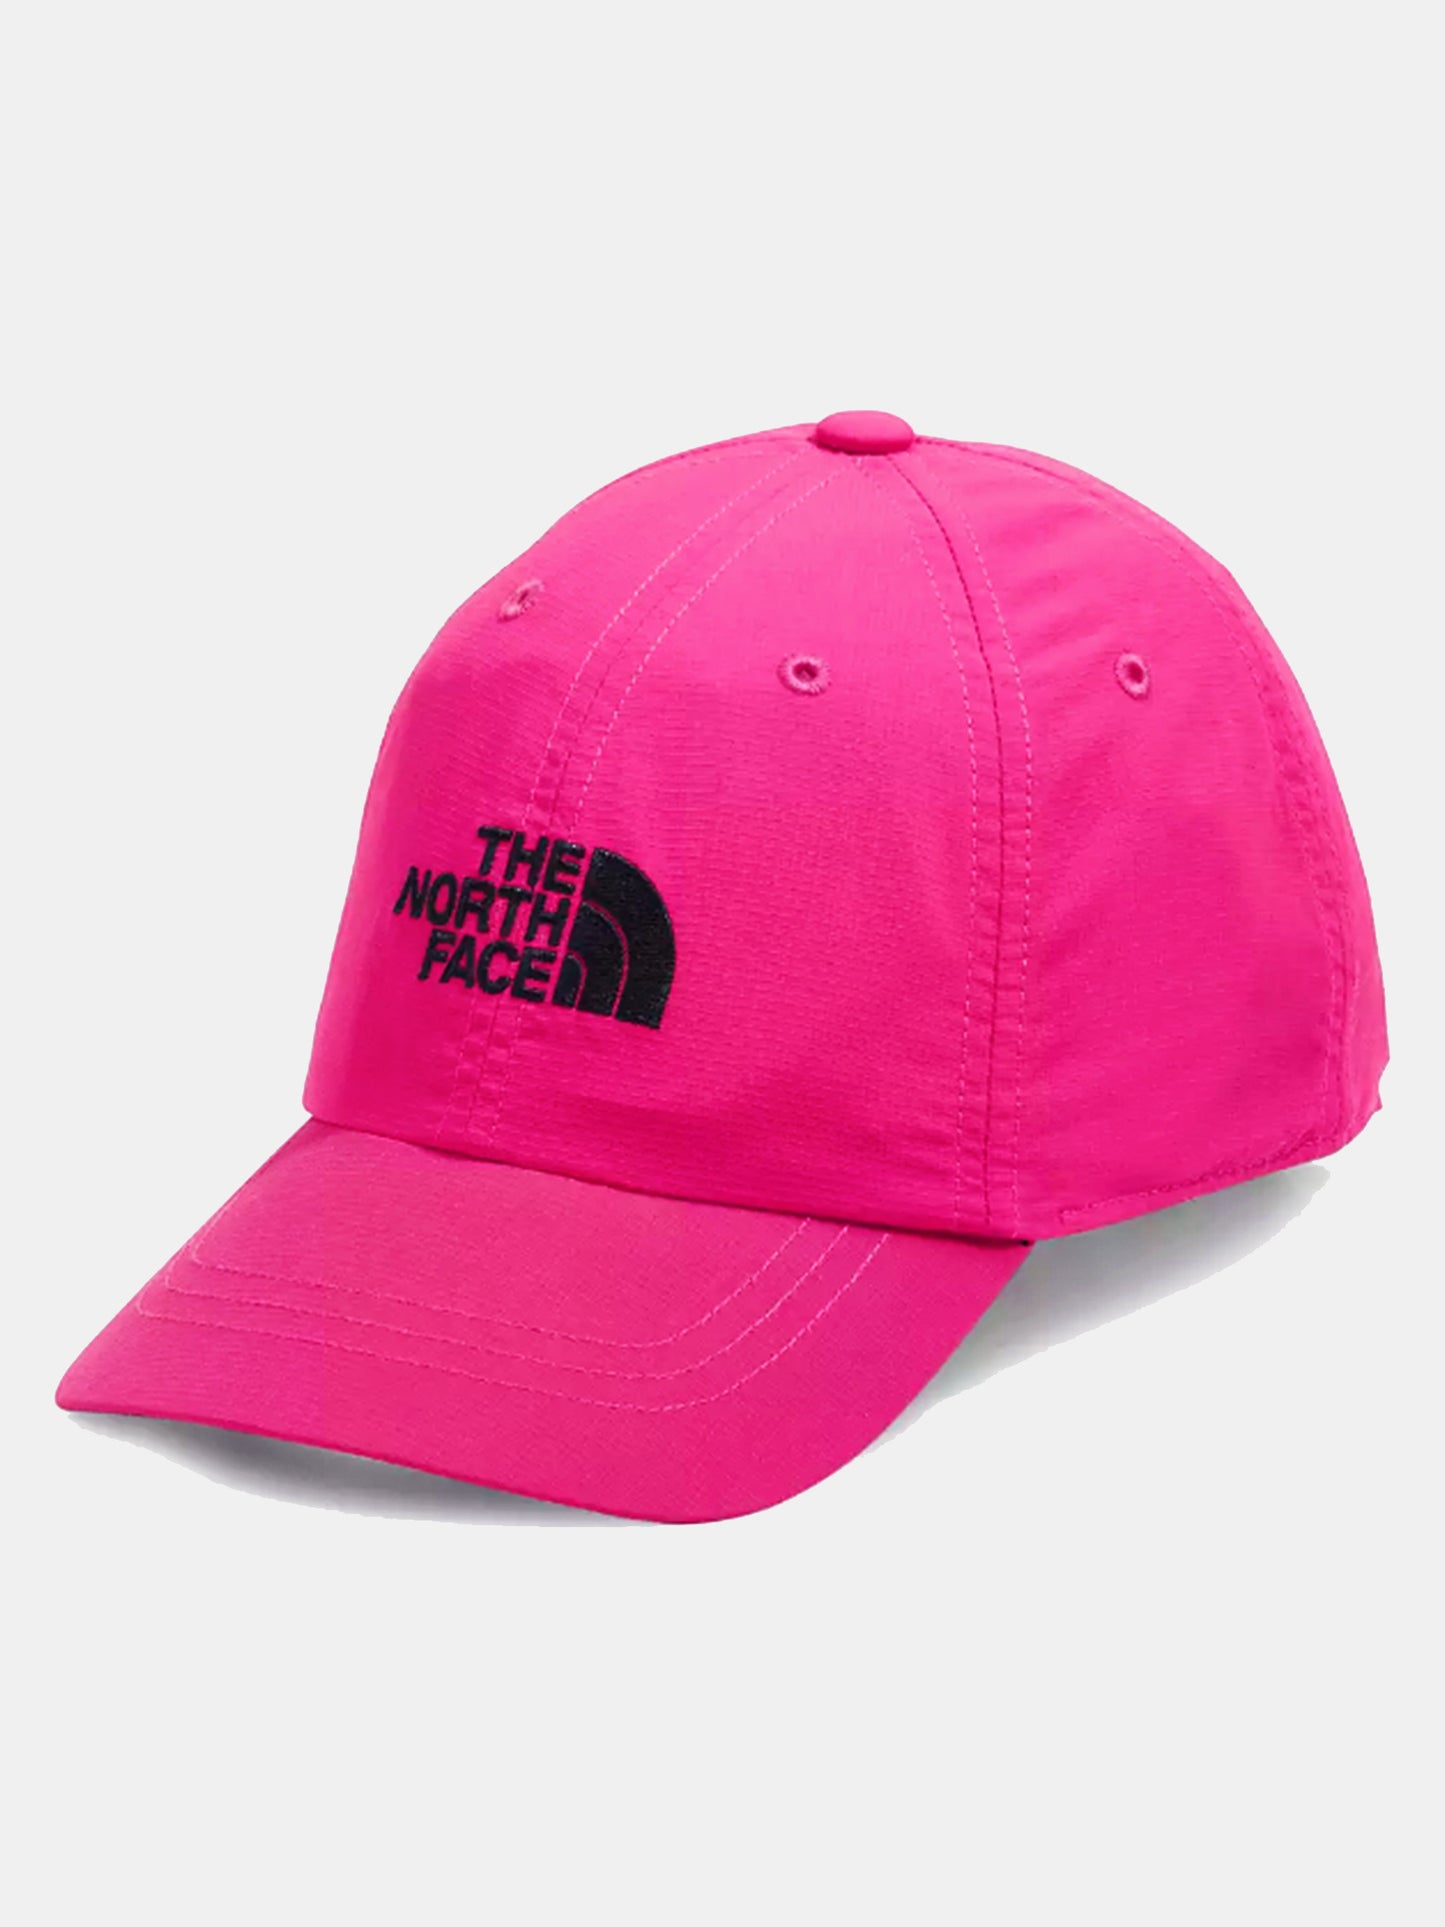 The North Face Youth Horizon Hat